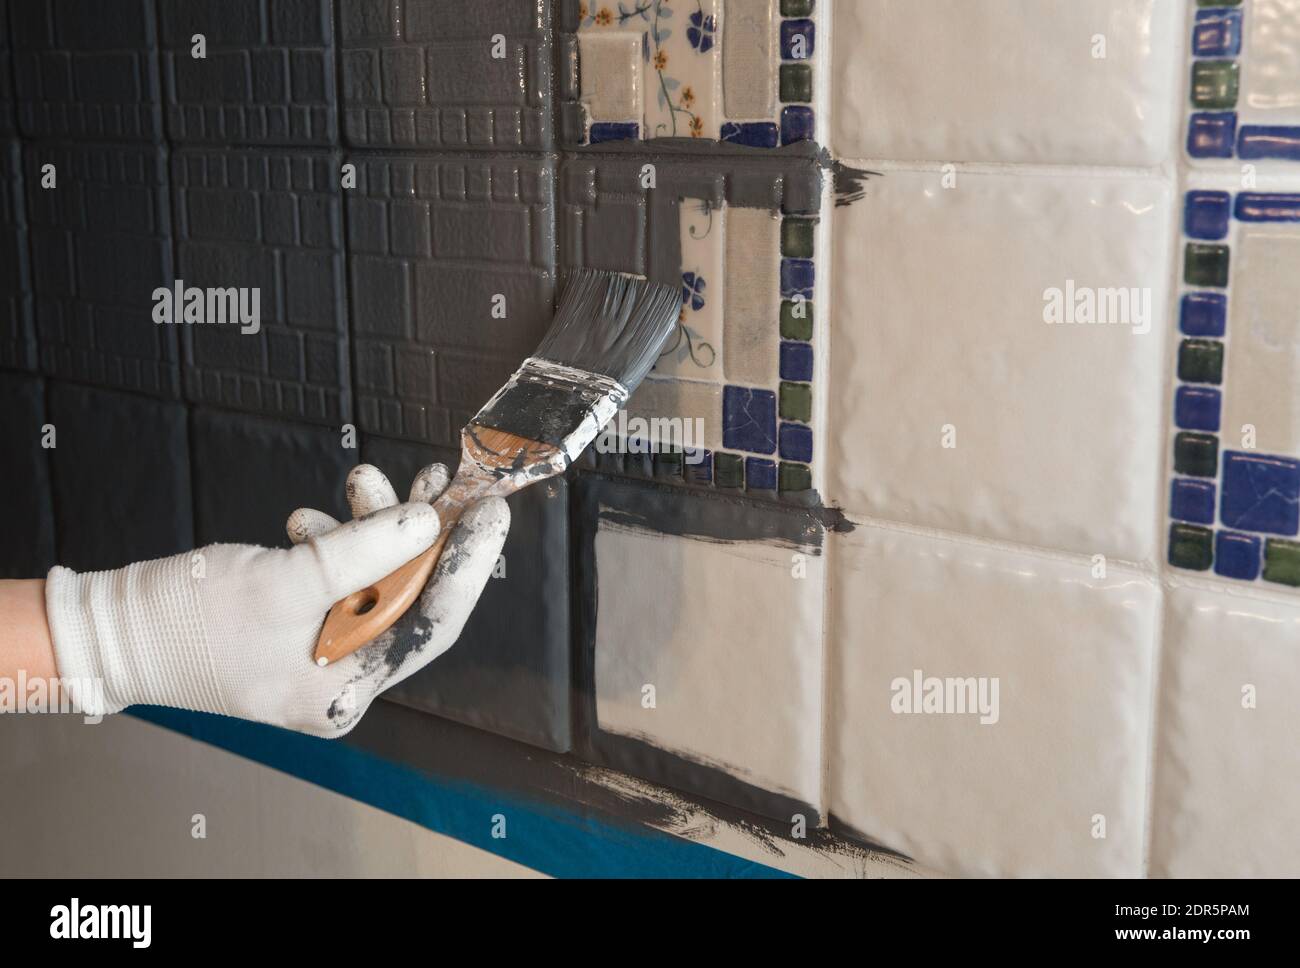 Repainting old dated kitchen ceramic tile back wall with modern gray chalk paint indoors at home. Giving old kitchen new look concept. Hand holding a Stock Photo